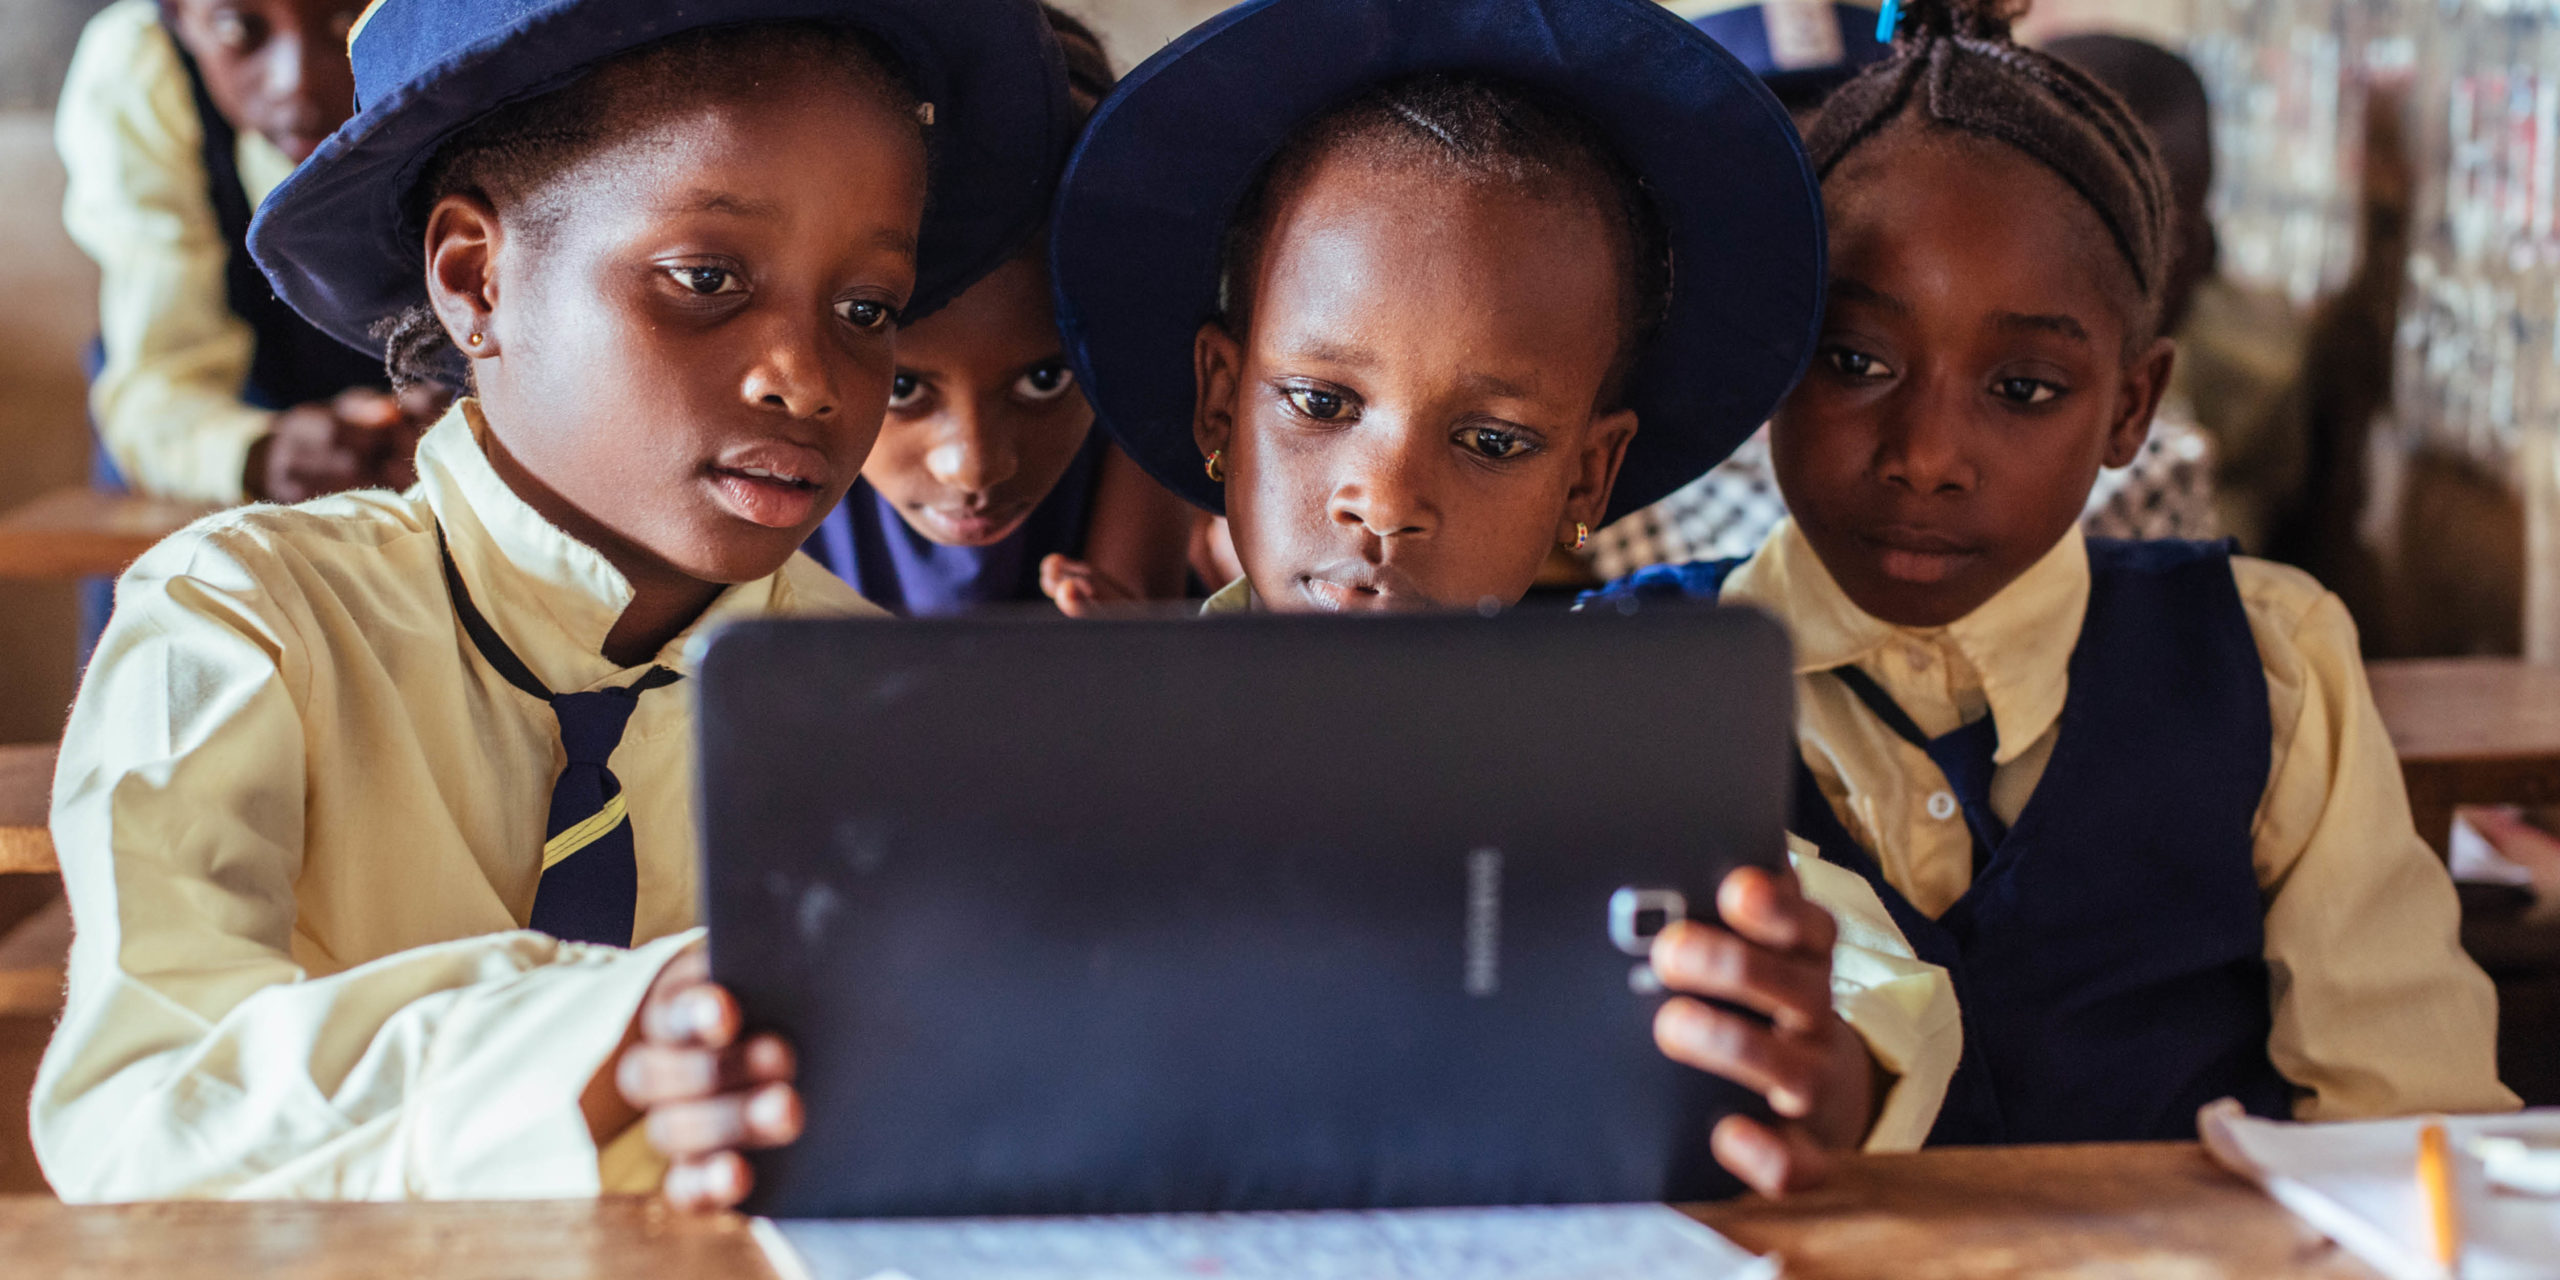 Students in Sierra Leone use education technology to increase their critical thinking